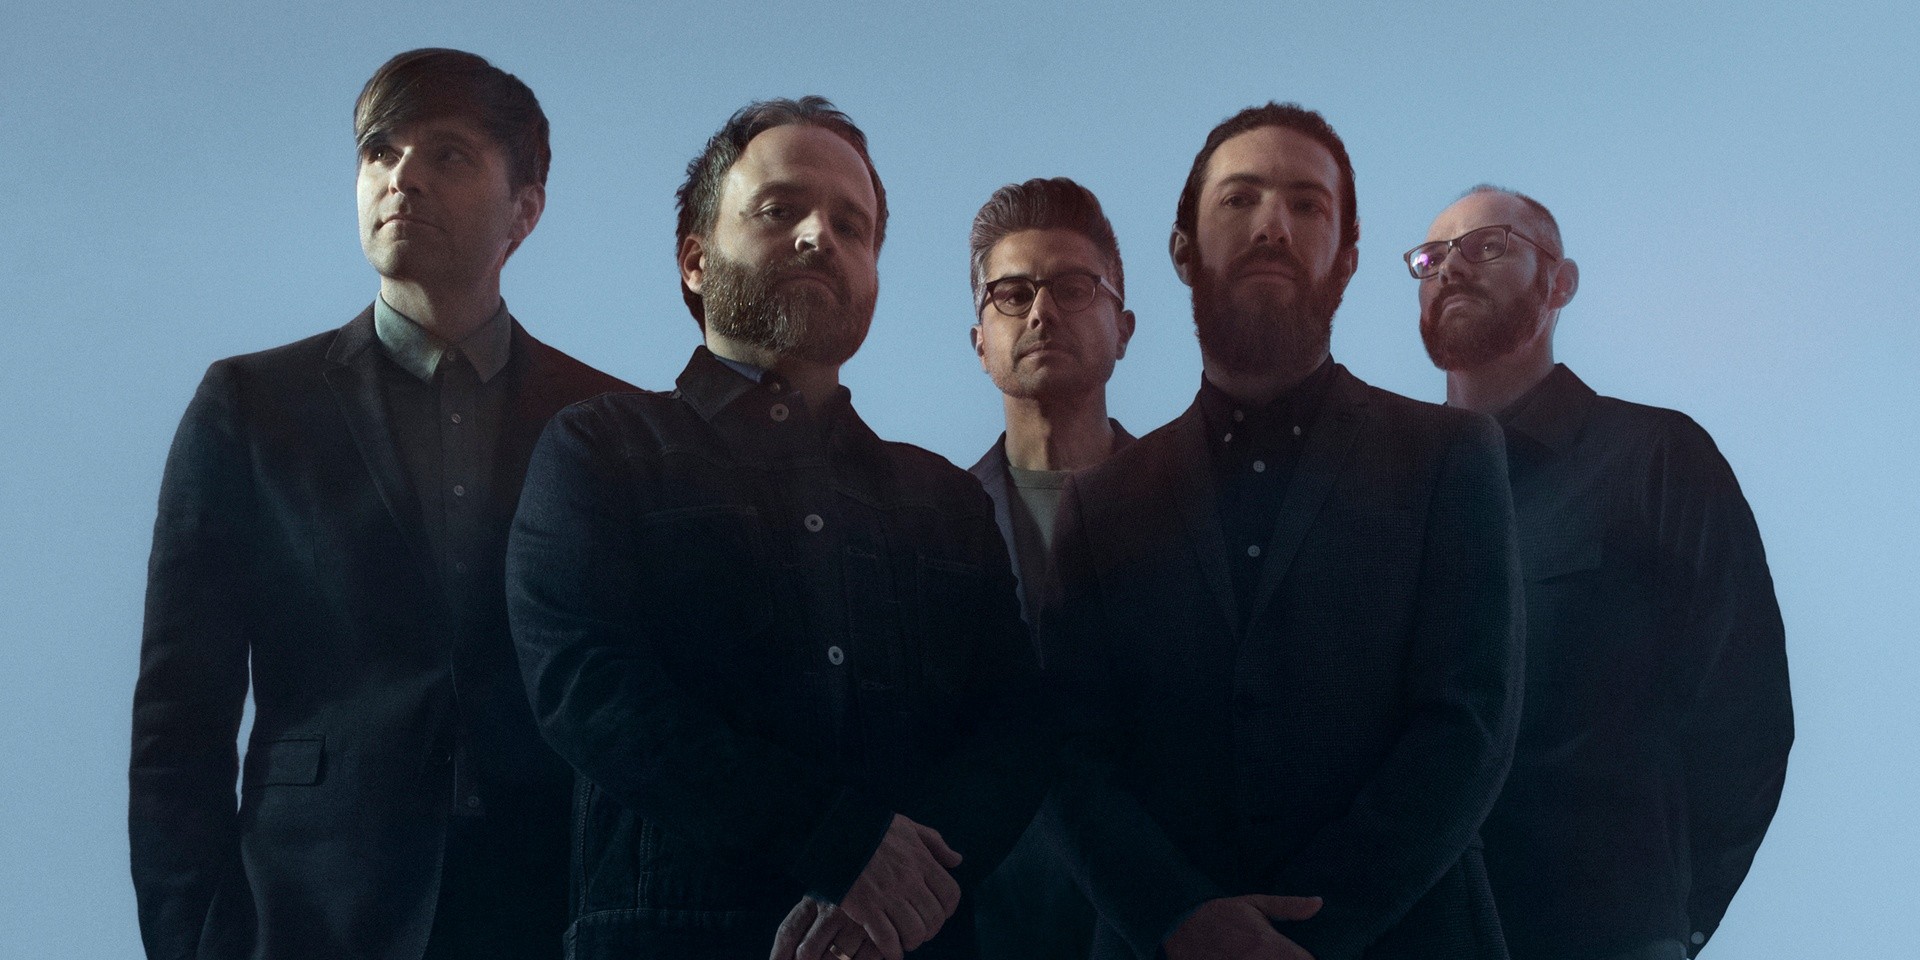 BREAKING: Death Cab For Cutie will perform at the Esplanade Theatre in Singapore this July